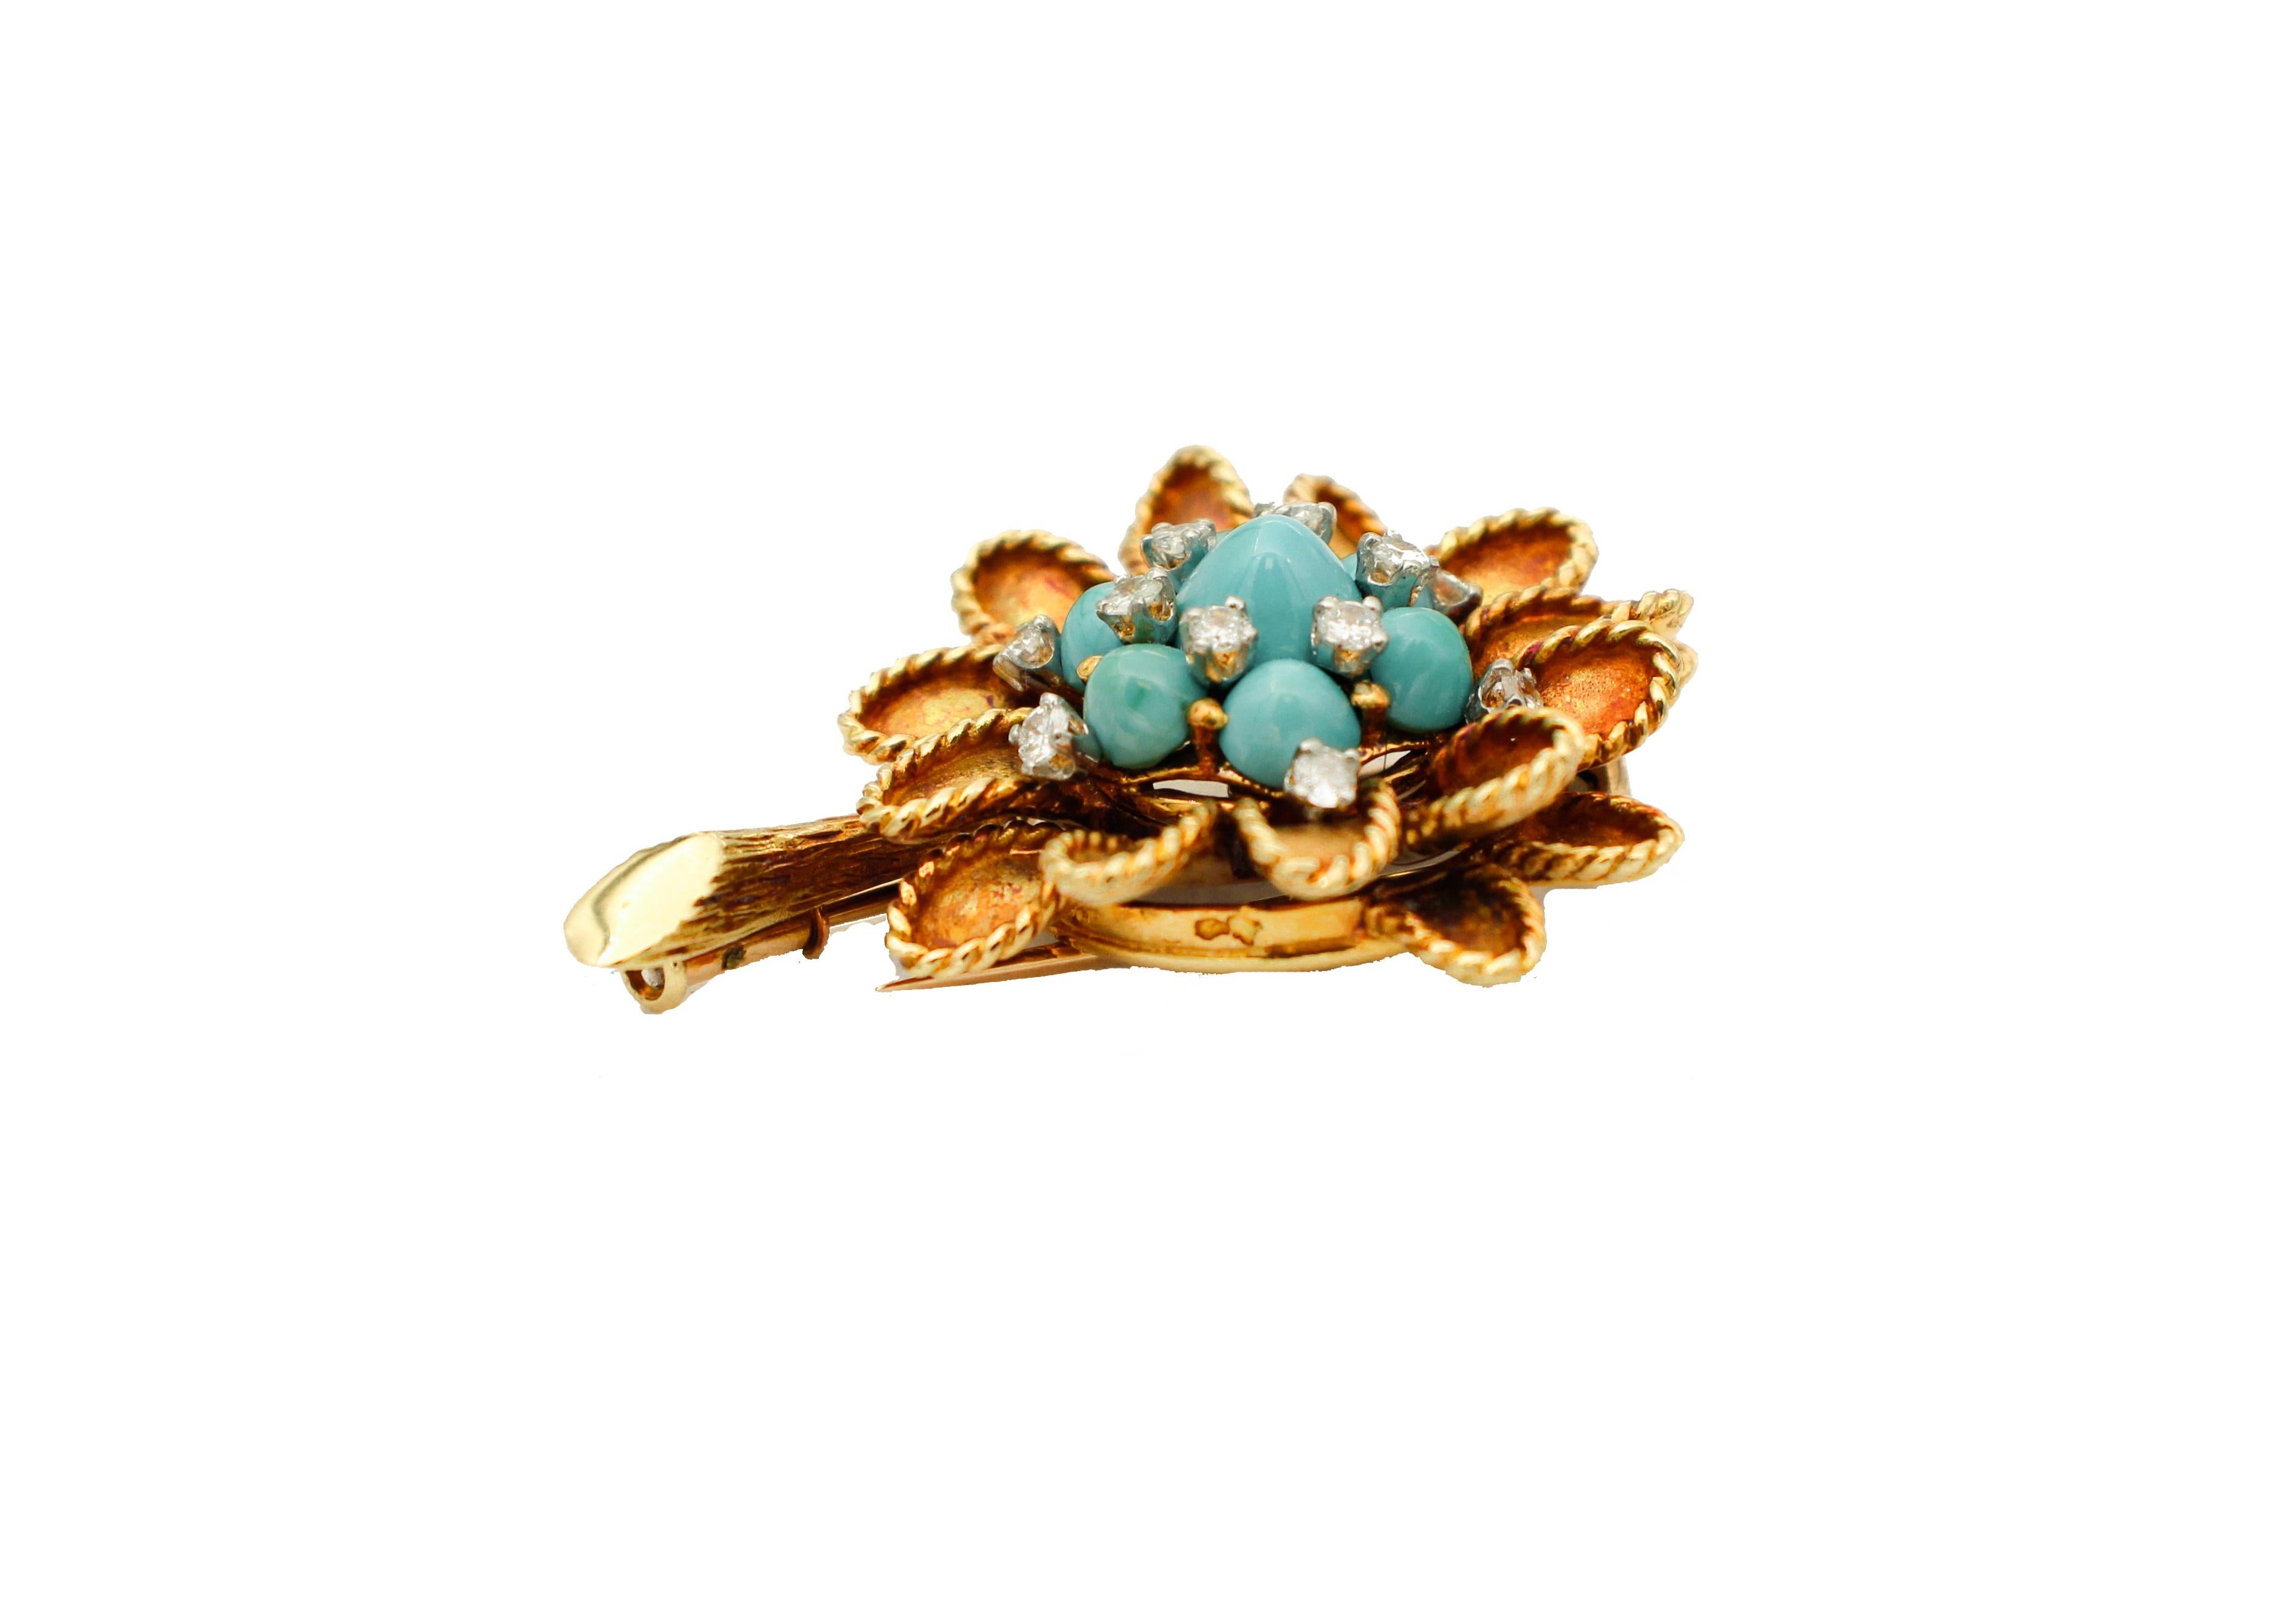 SHIPPING POLICY:
No additional costs will be added to this order.
Shipping costs will be totally covered by the seller (customs duties included).

Elegant French flower brooch in 18 karat yellow gold and platinum mounted, in the central part, with a